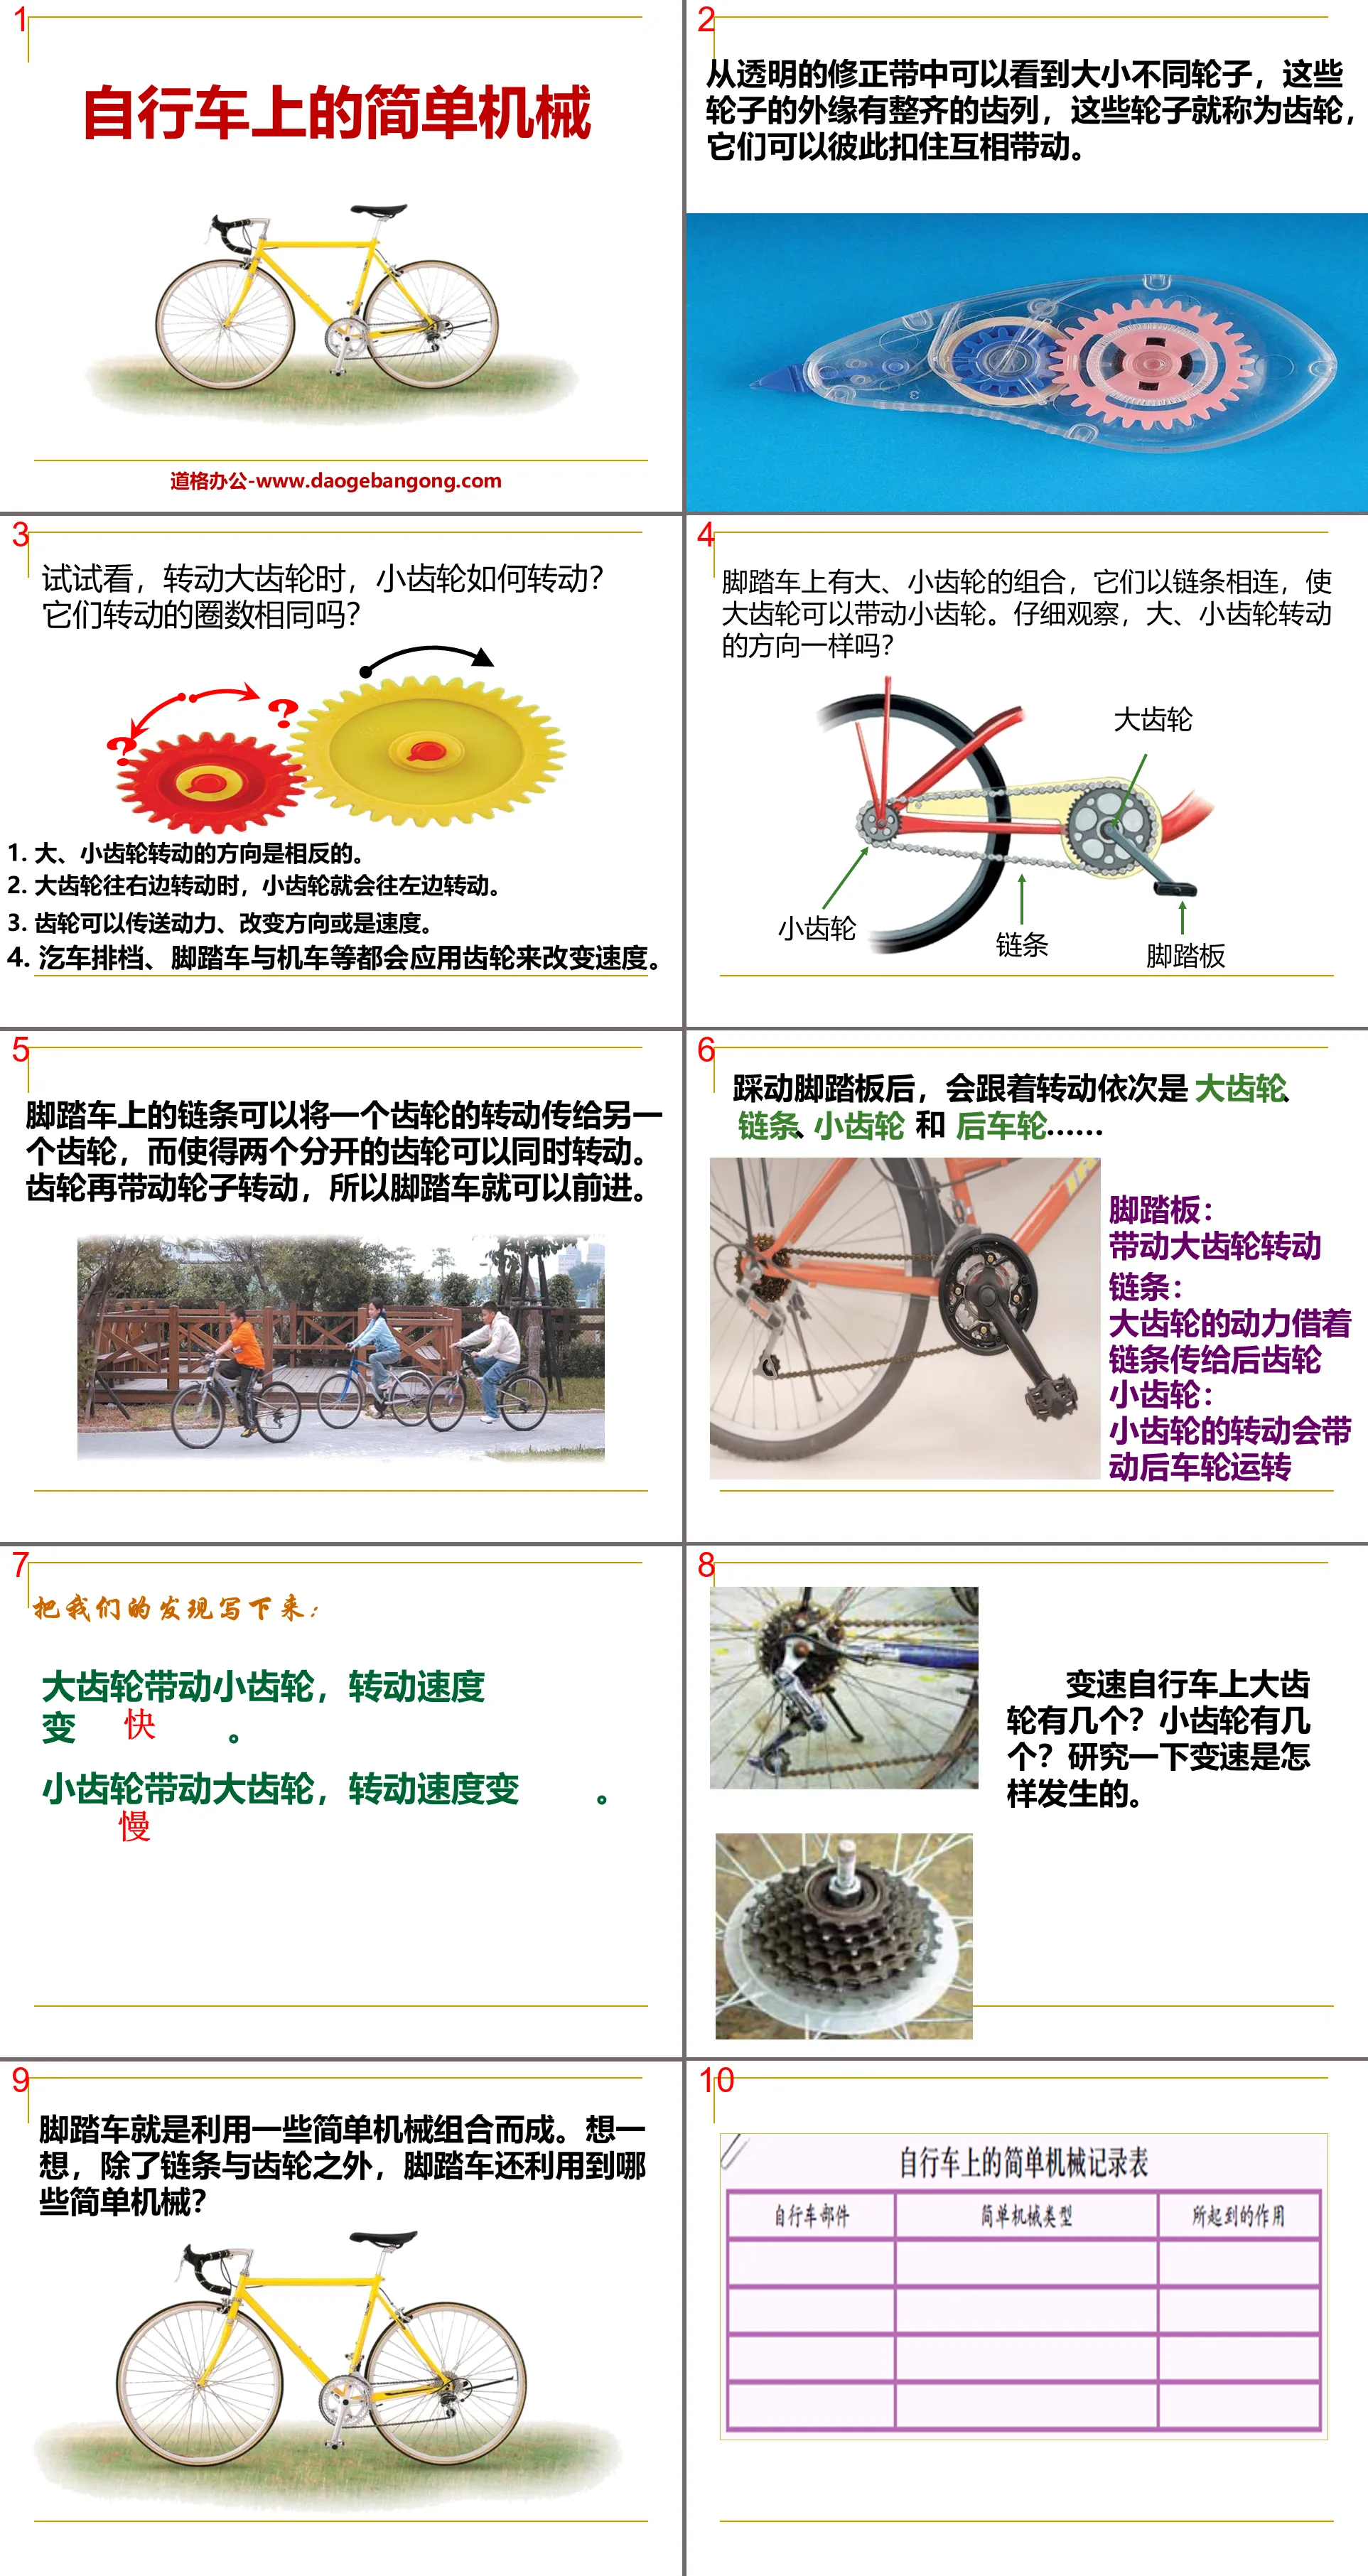 "Simple Machinery on Bicycles" Tools and Machinery PPT Courseware 2